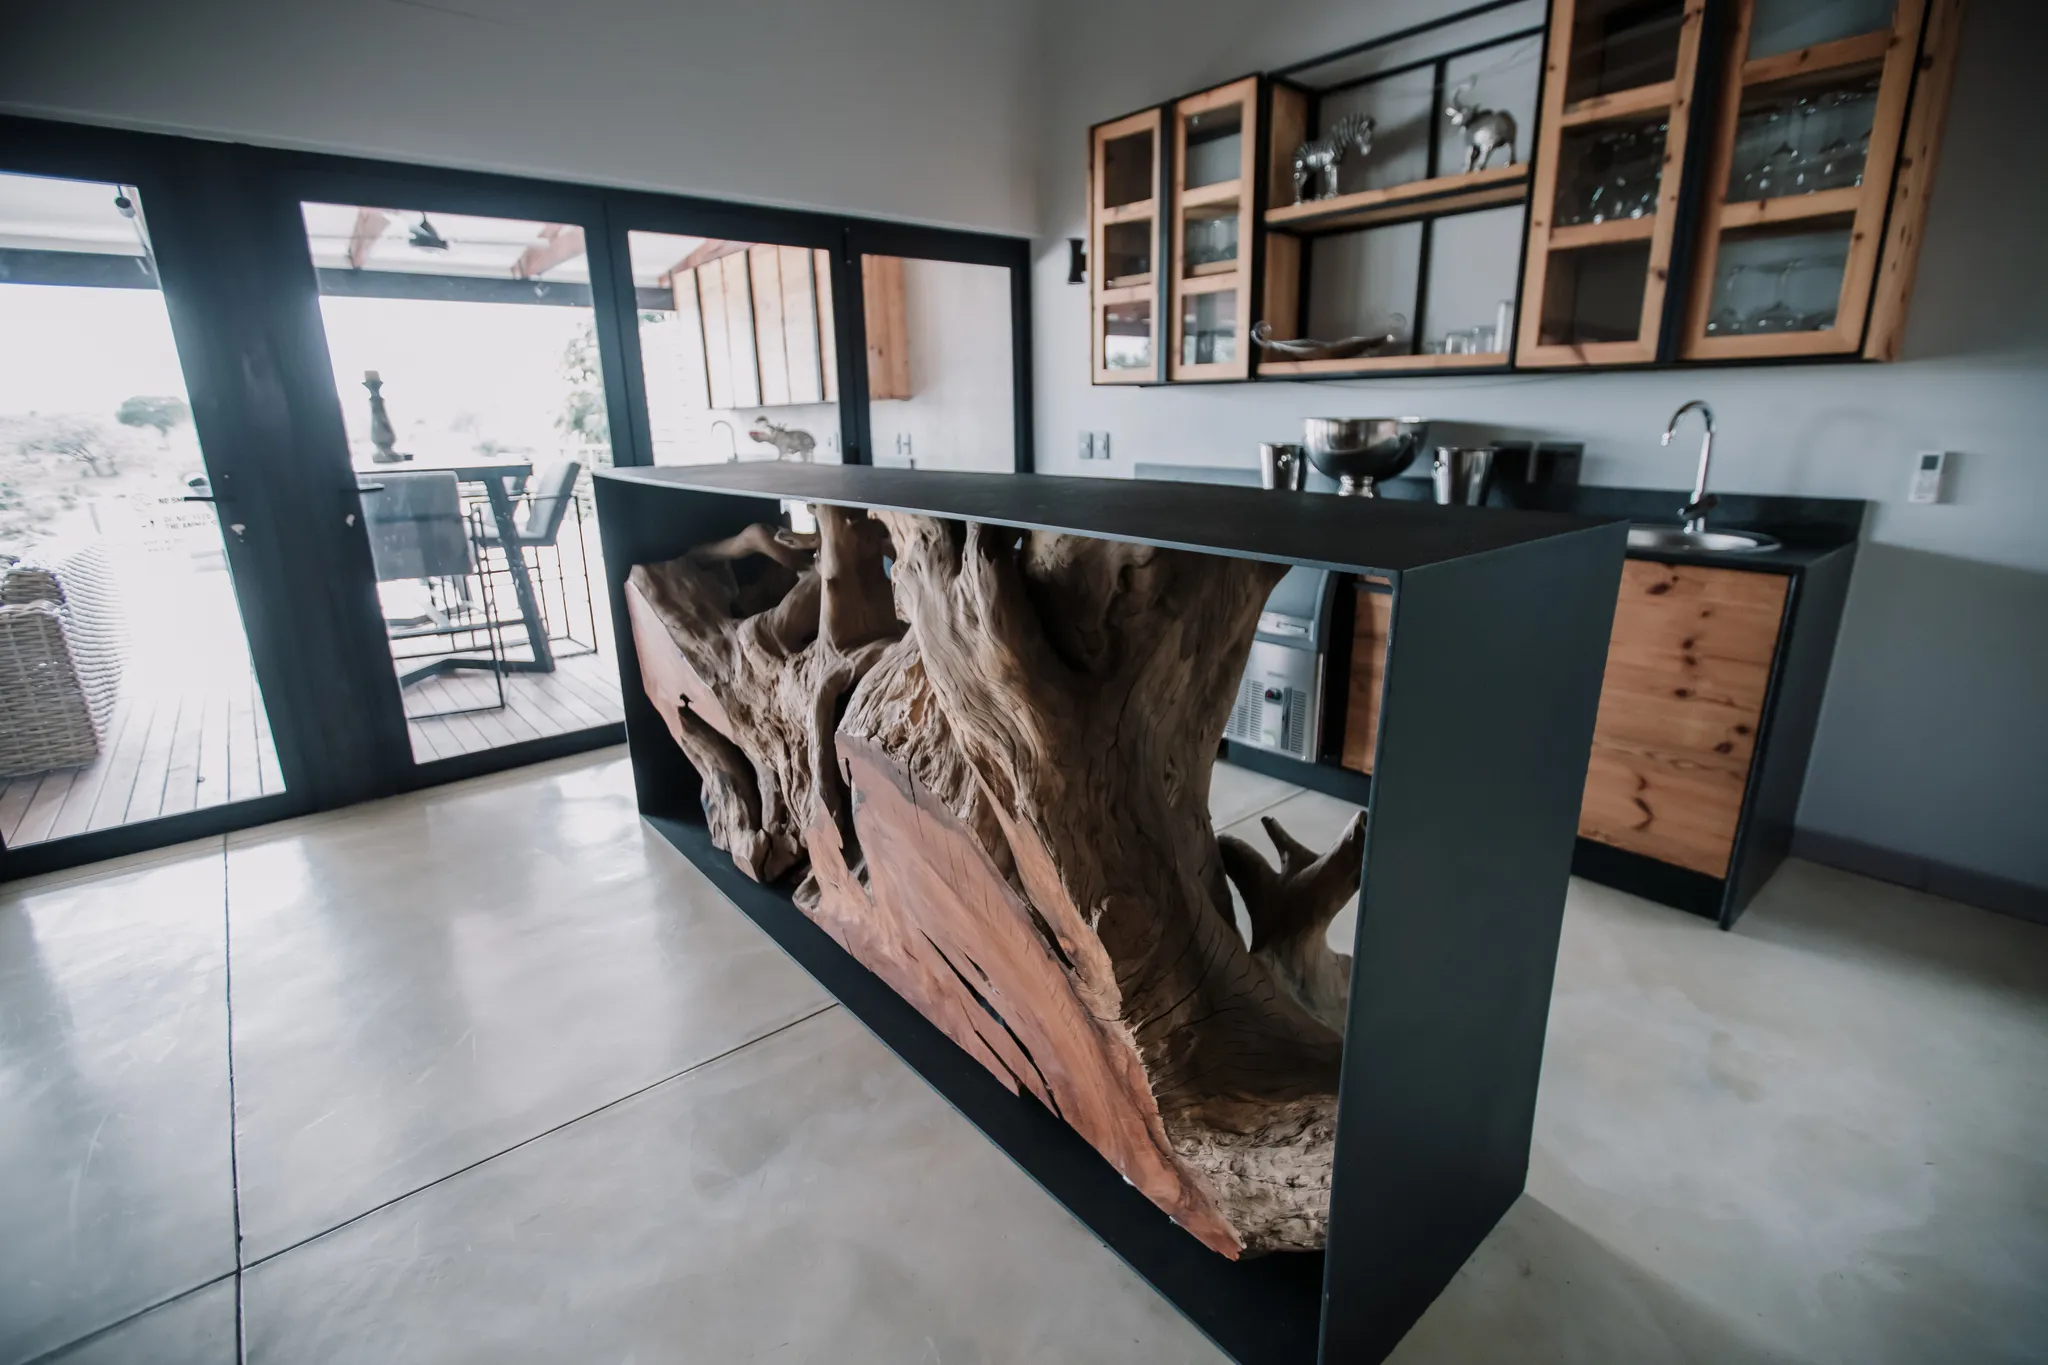 A kitchen with a custom made counter that has a tree log built into it.